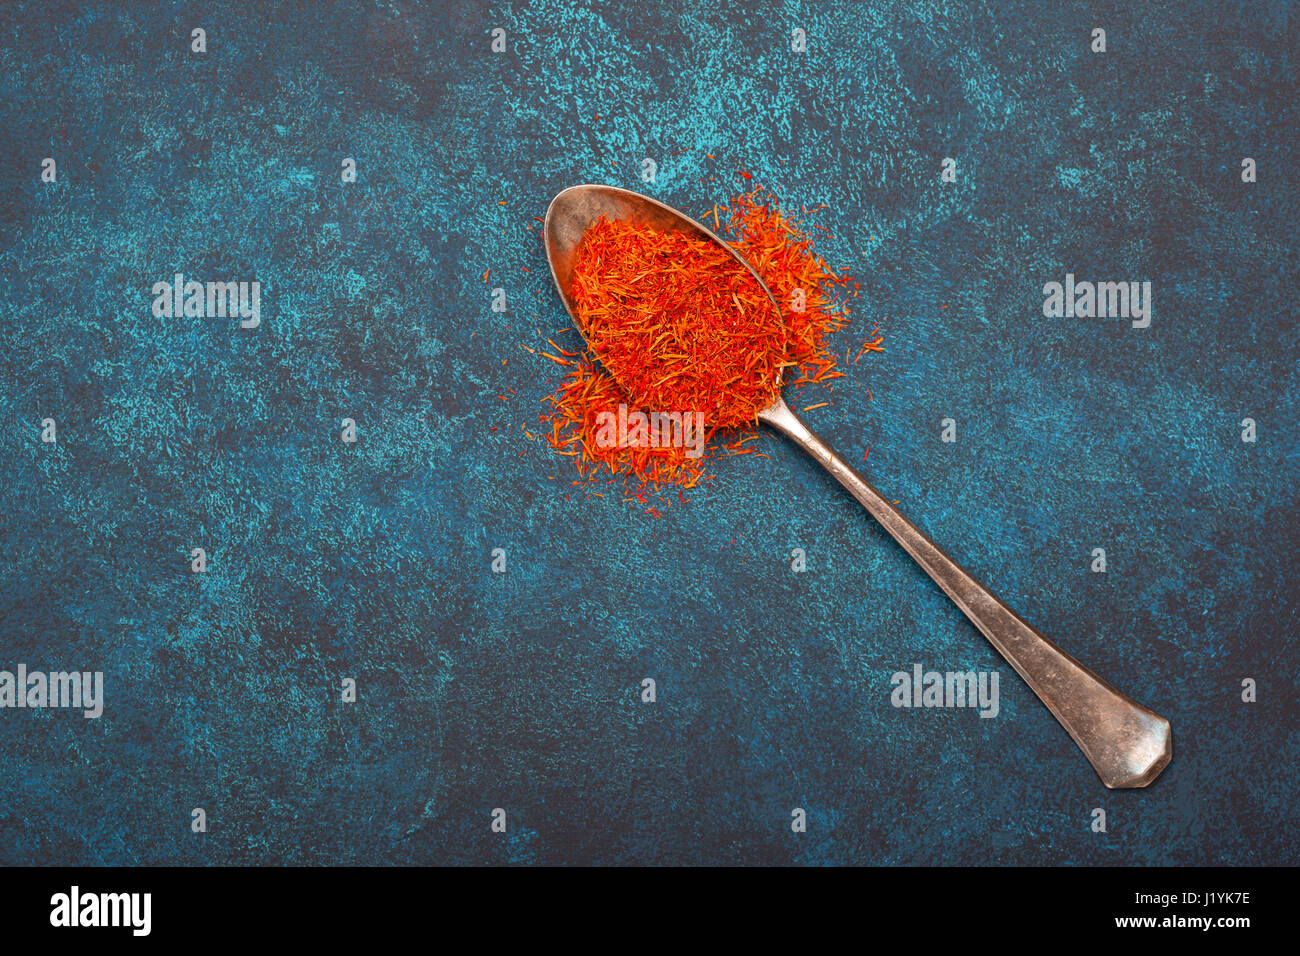 Saffron in an old silver spoon on a blue background. View from above. Stock Photo